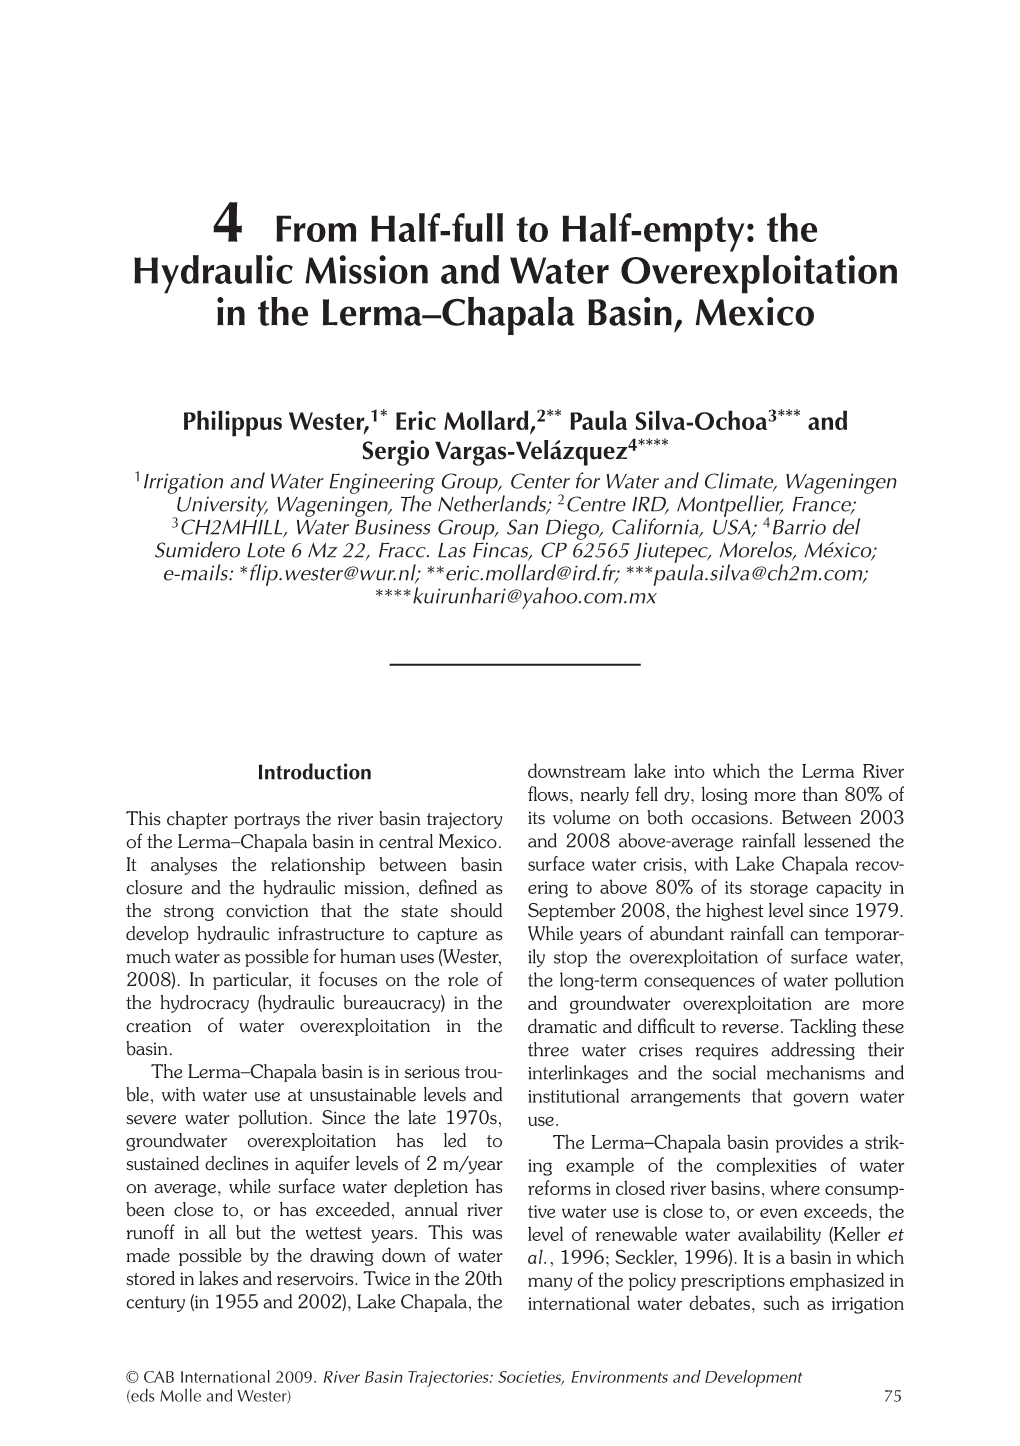 4 from Half-Full to Half-Empty: the Hydraulic Mission and Water Overexploitation in the Lerma–Chapala Basin, Mexico